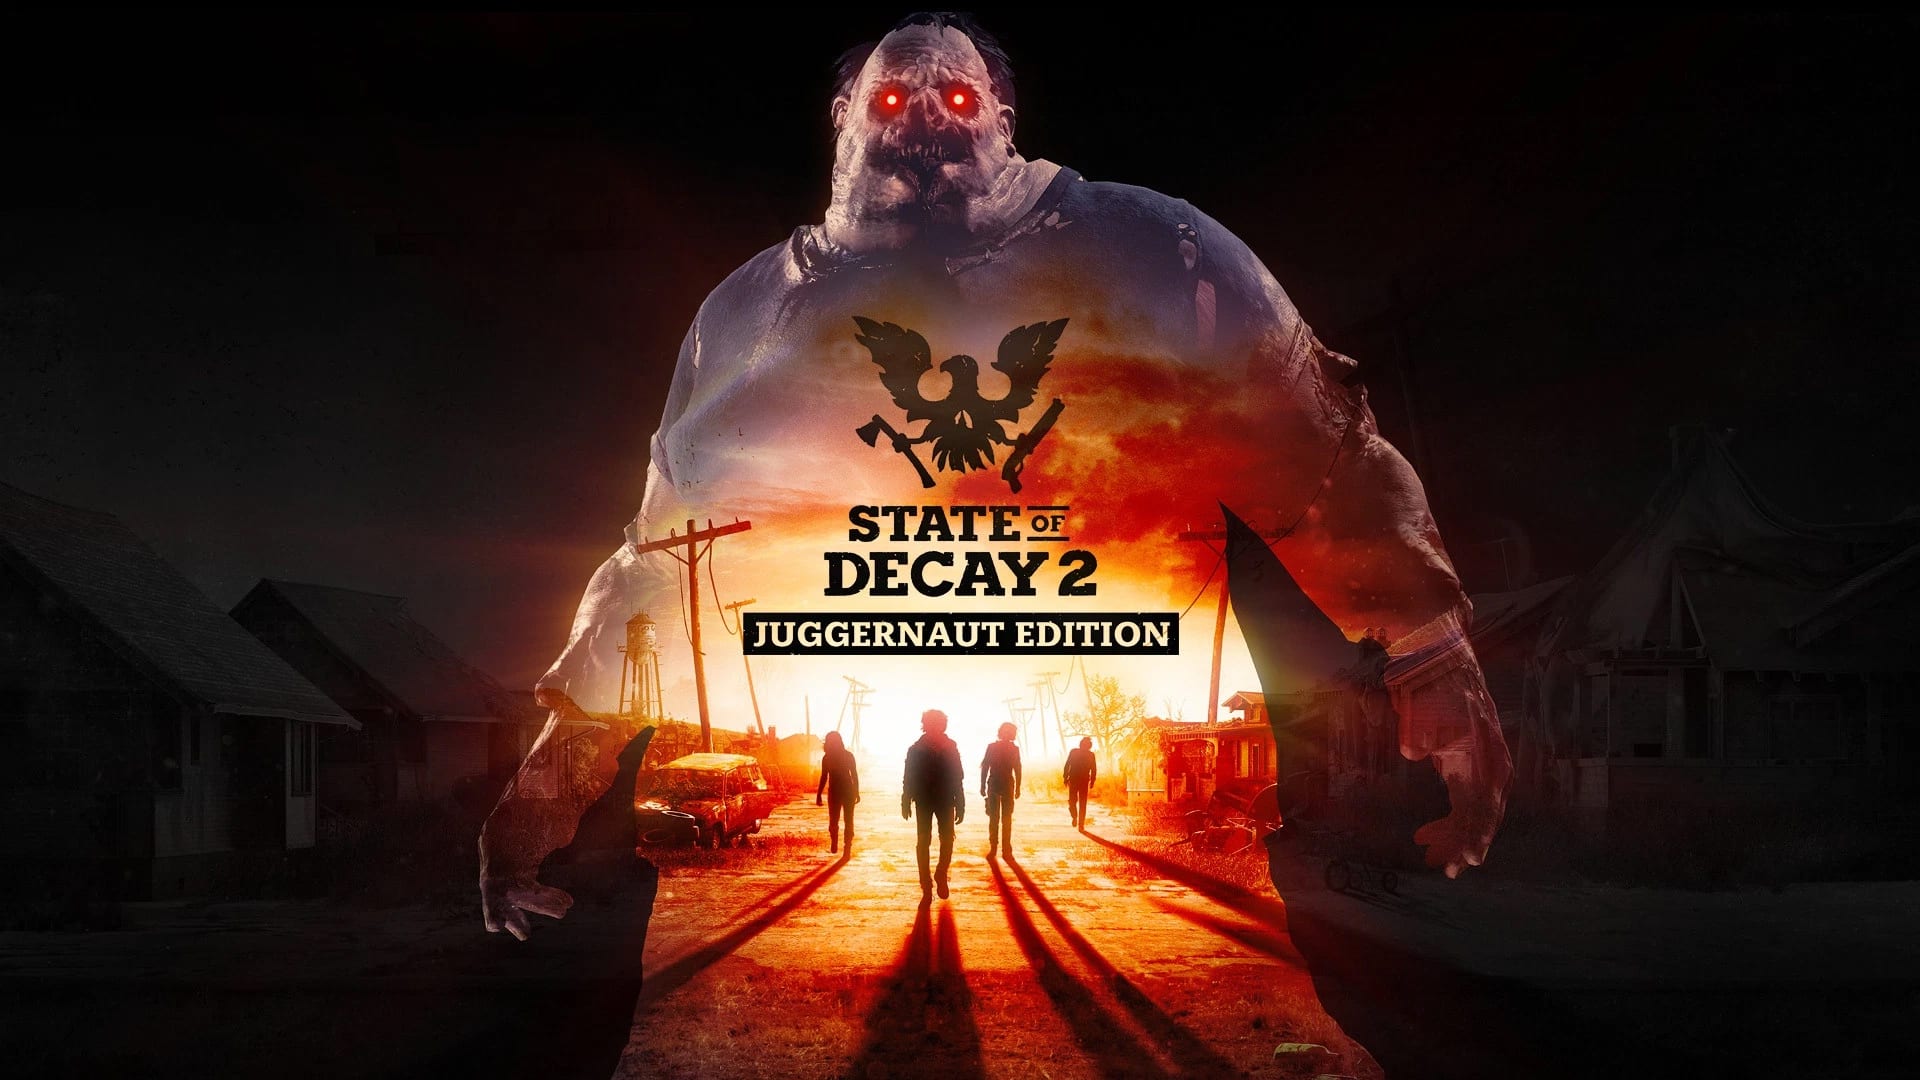 State Of Decay 2 Launches On Steam In 2020 - GameSpot